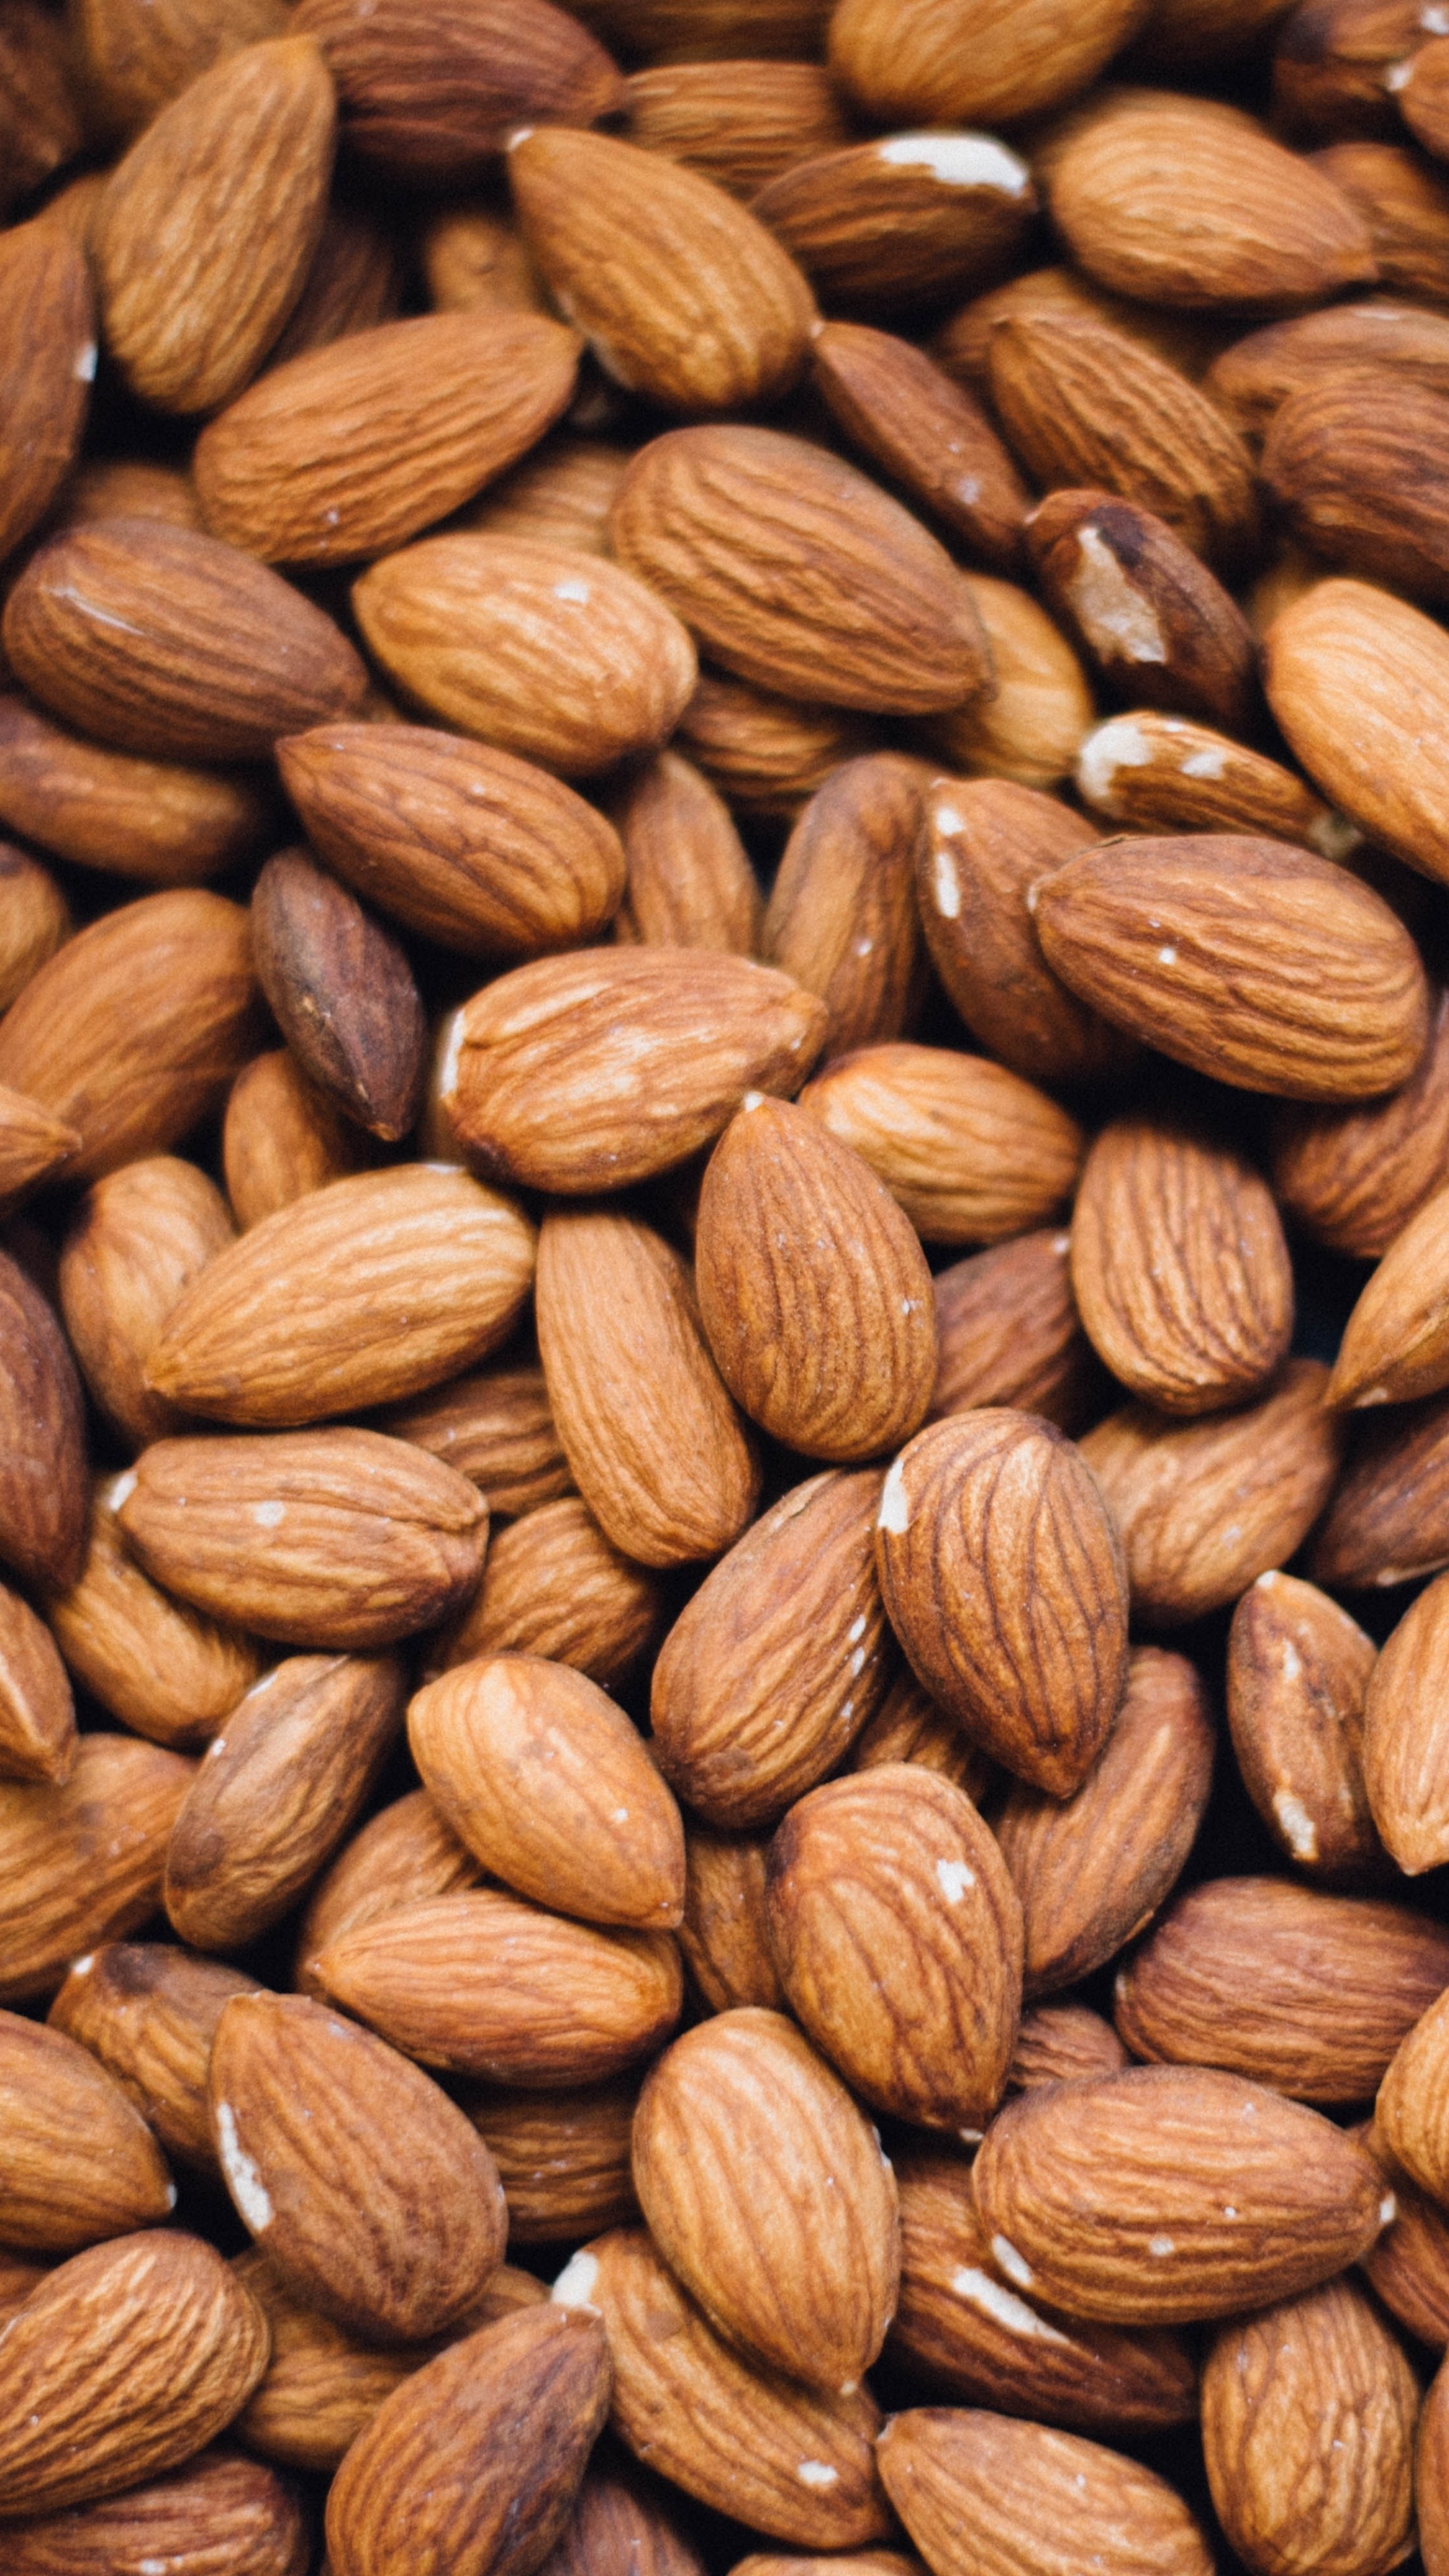 Nuts: Almonds, High in antioxidants, vitamin E, protein, and fiber. 2160x3840 4K Background.